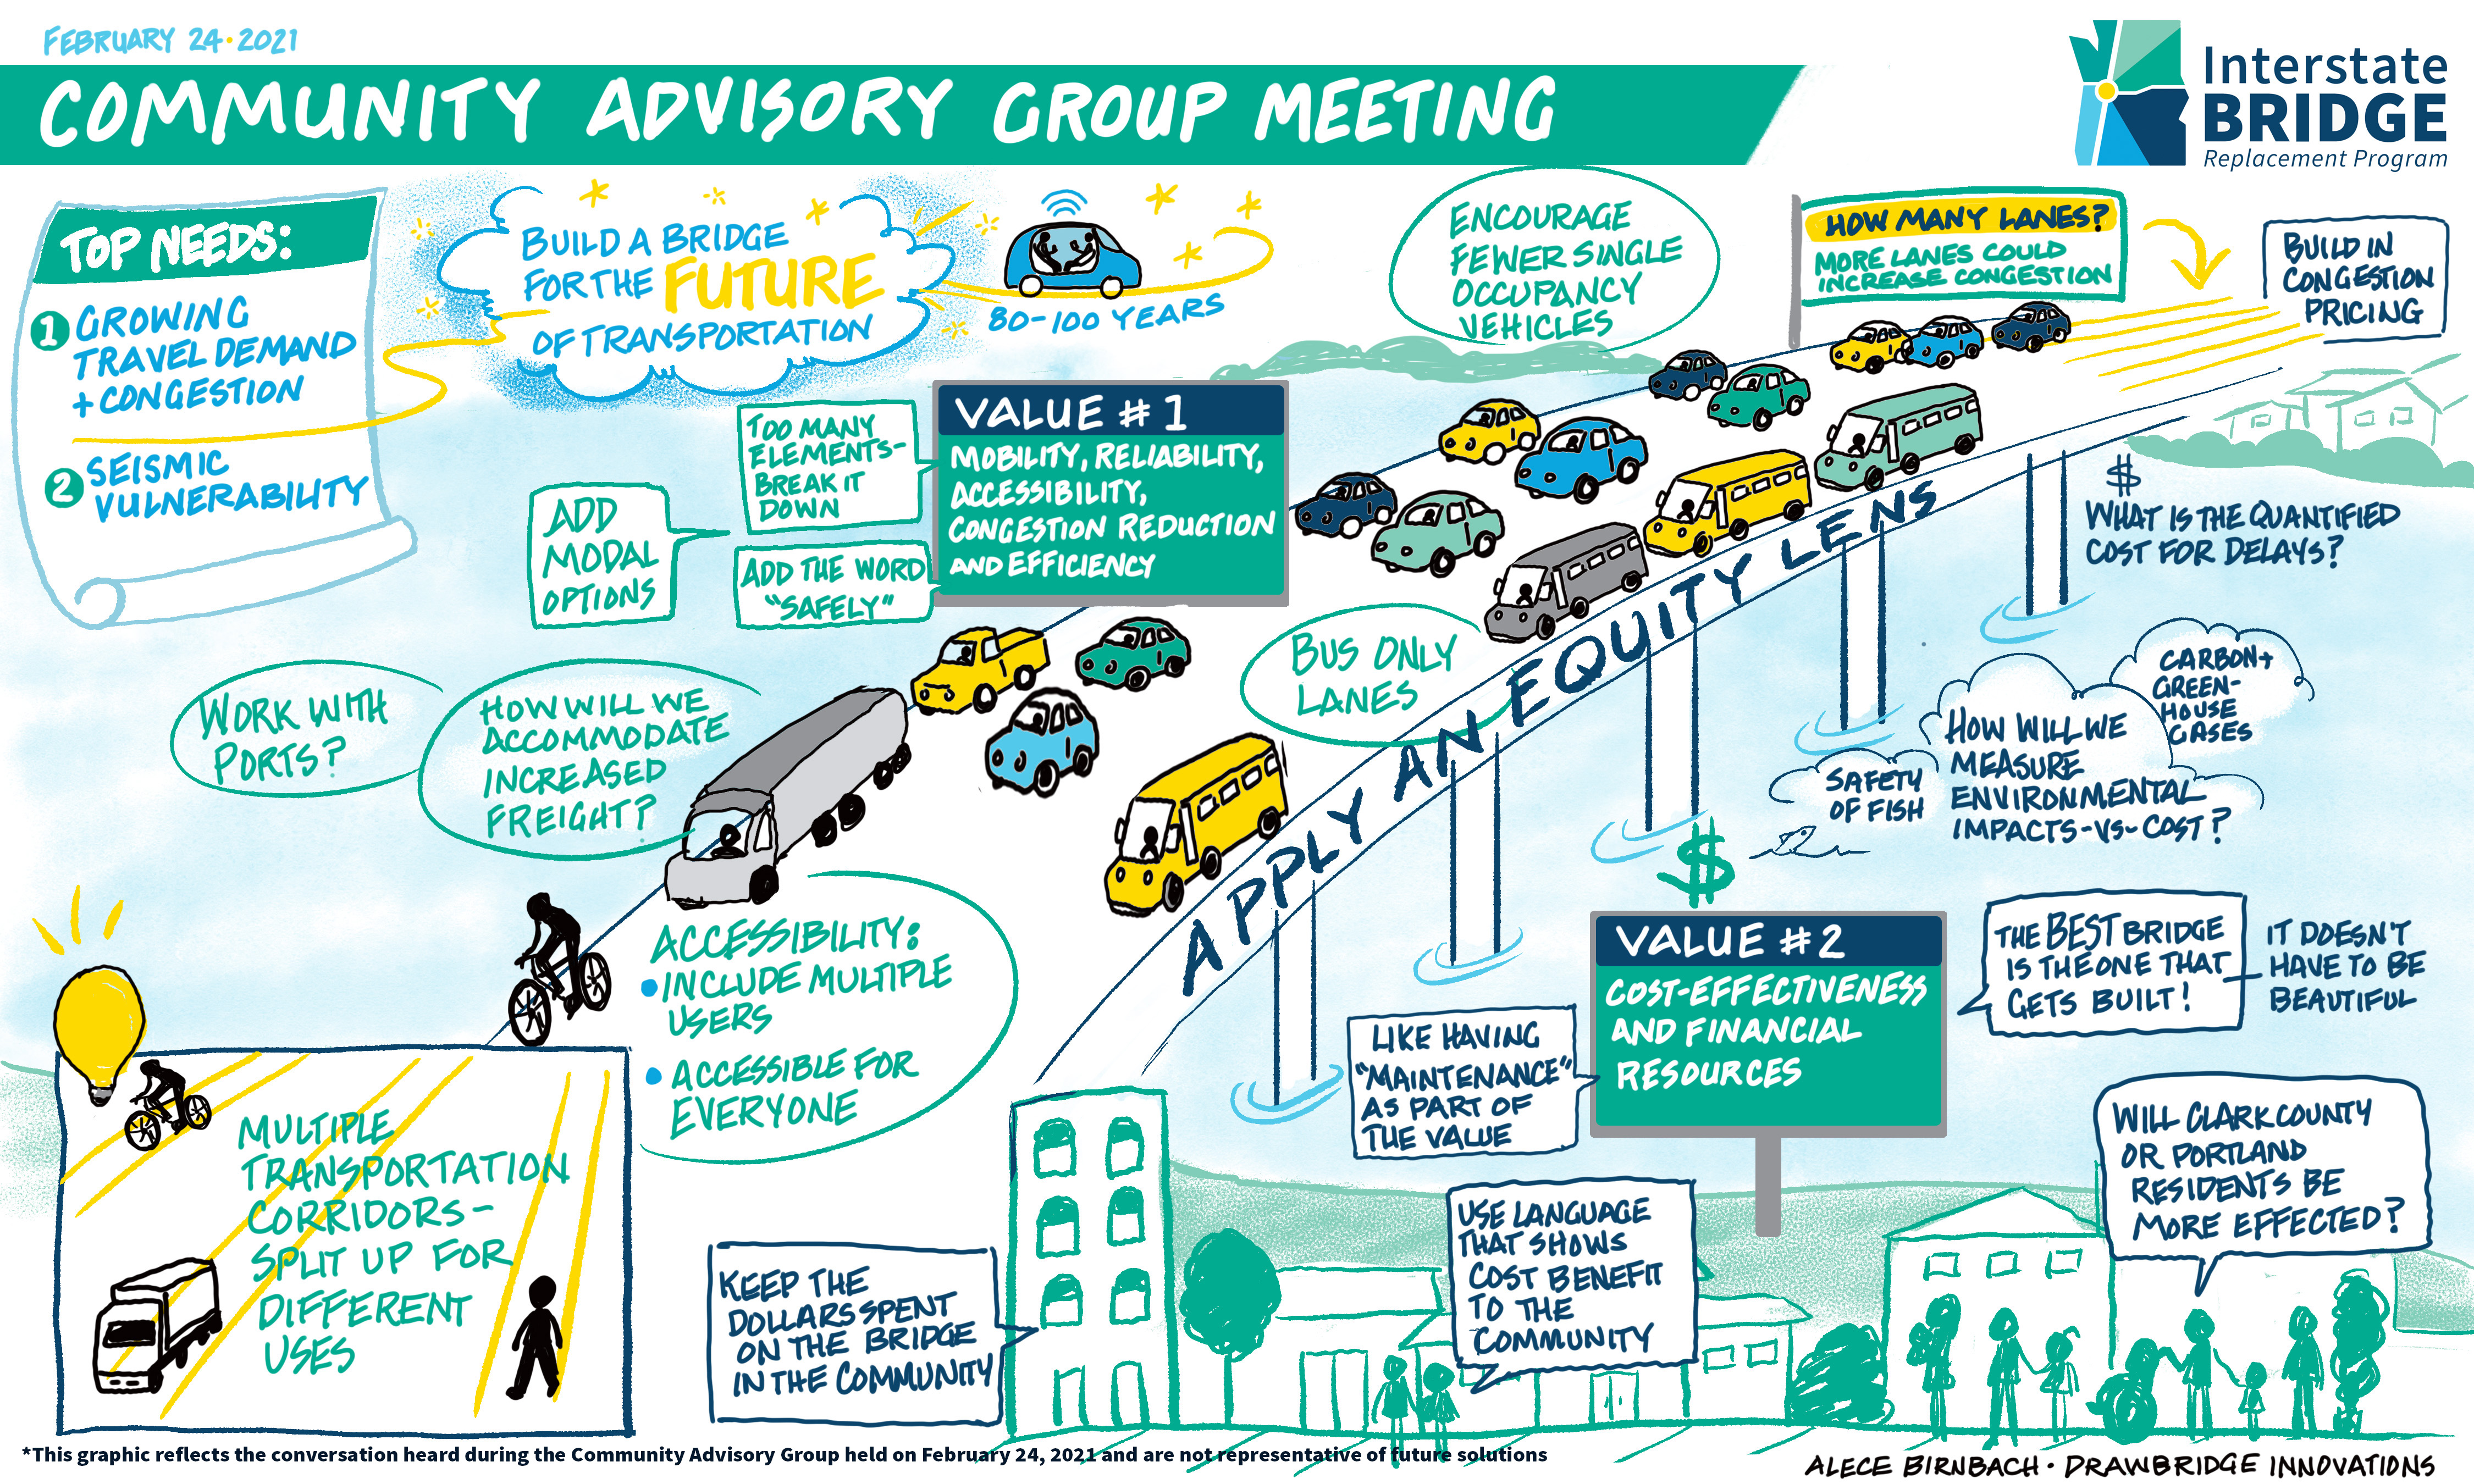 <p>Artistic illustration of vehicles, people, and bicycles using a bridge to cross a river. Handwritten text is featured throughout the illustration, capturing a summary of comments, concerns, and ideas heard during the February 24, 2021 Community Advisory Group Meeting. The top needs captured include growing travel demand and congestion, plus seismic vulnerability. Two values are captured. The first value is mobility, reliability, accessibility, congestion reduction, and efficiency. Comments around this value include: too many elements listed and a need to break it down, add modal option, add the word “safely.” The second value is cost-effectiveness and financial resources. Comments around this value include: maintenance should be part of the value, keep dollars spent on the bridge in the community, and the best bridge is the one that gets built – it doesn’t have to be beautiful.</p>